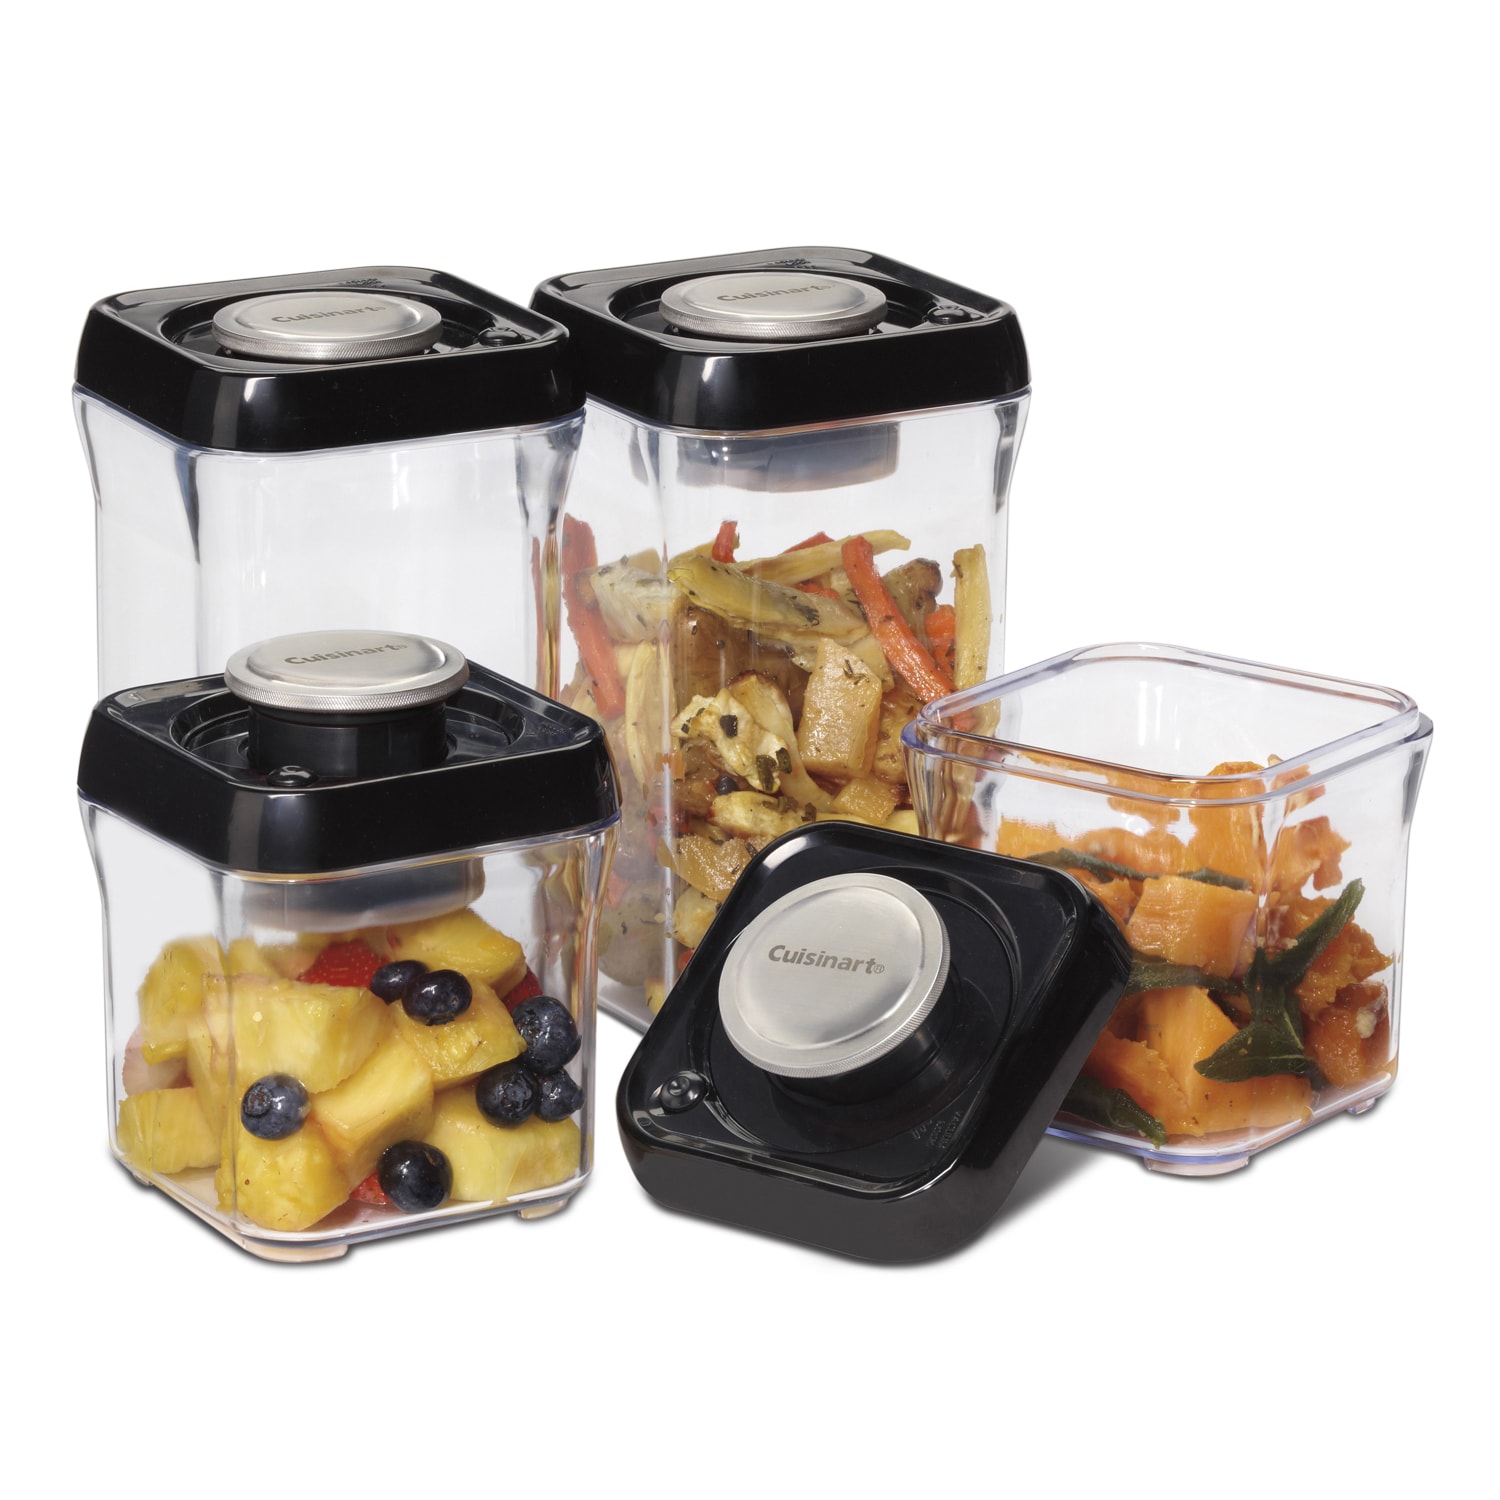 https://ak1.ostkcdn.com/images/products/7988329/Fresh-Edge-8-Piece-Vacuum-Sealed-Food-Storage-Containers-cbc47cb6-bc55-4df7-997d-c18bb3aad1df.jpg